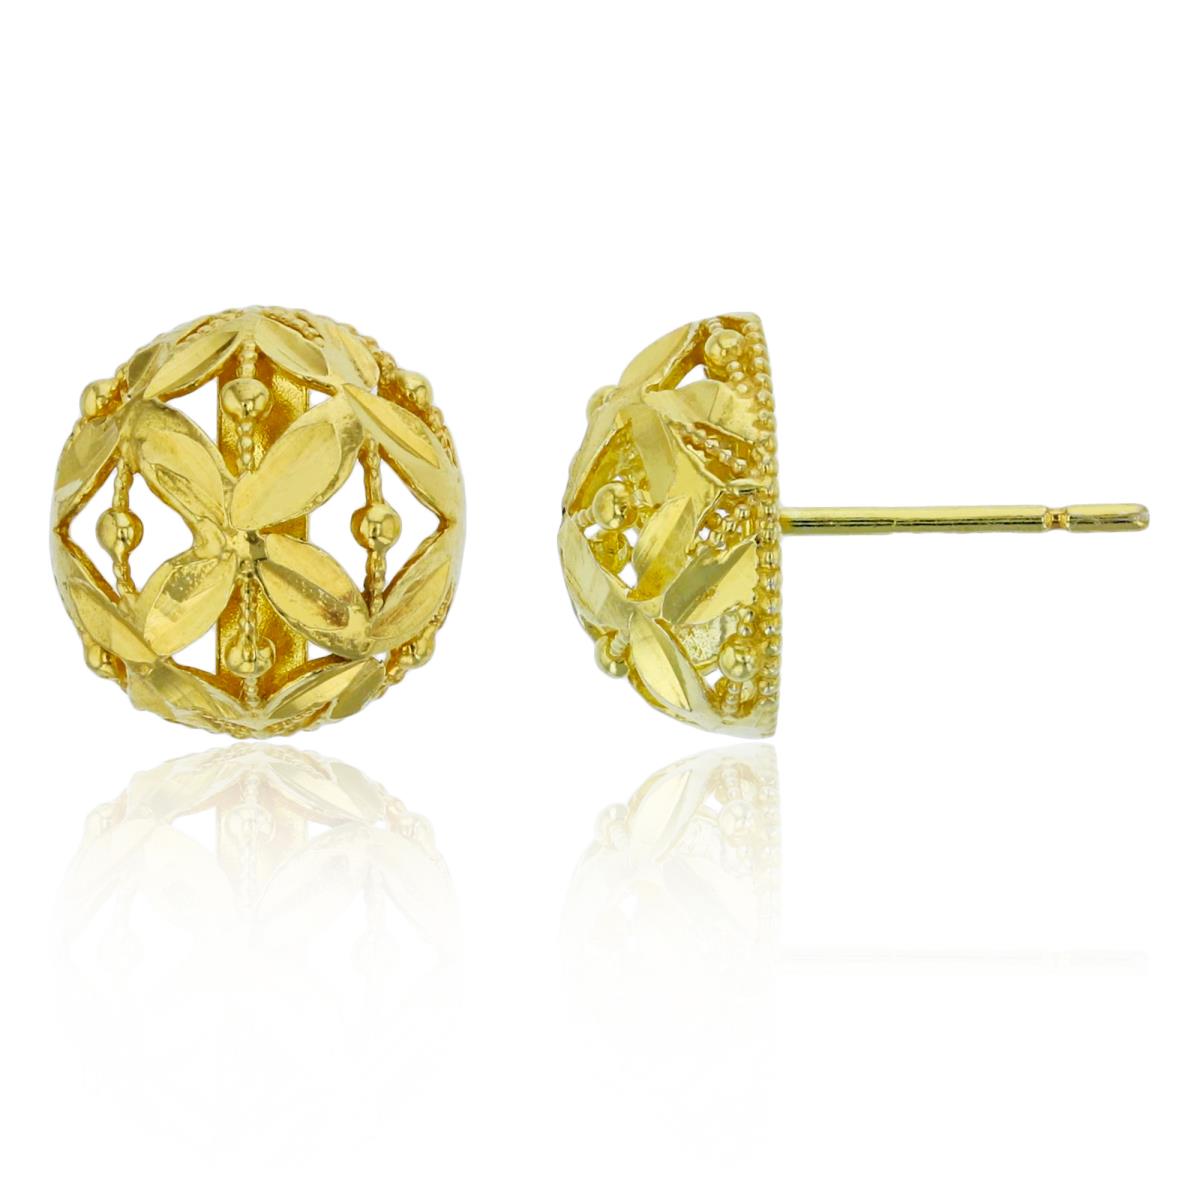 Sterling Silver Yellow DC 11mm Filigree Dome Stud Earring